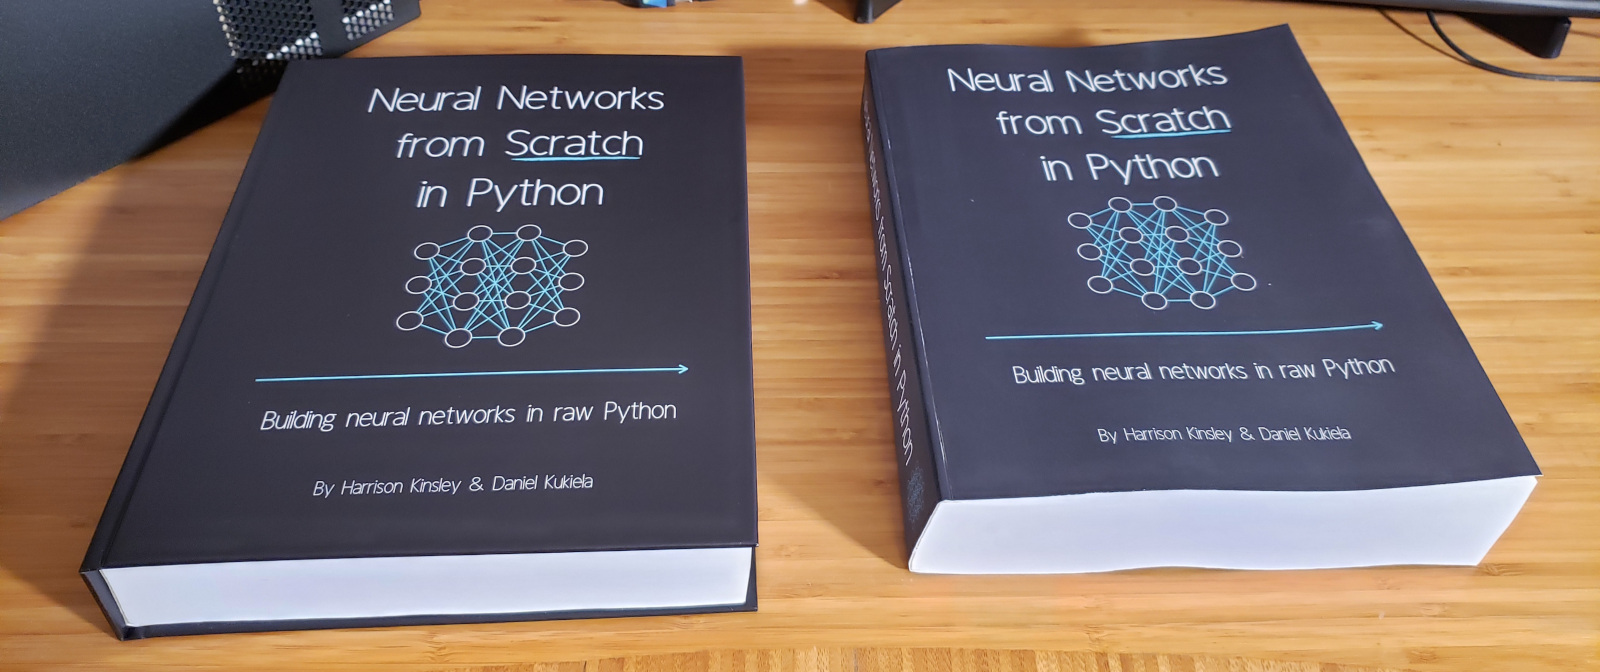 neural networks from scratch